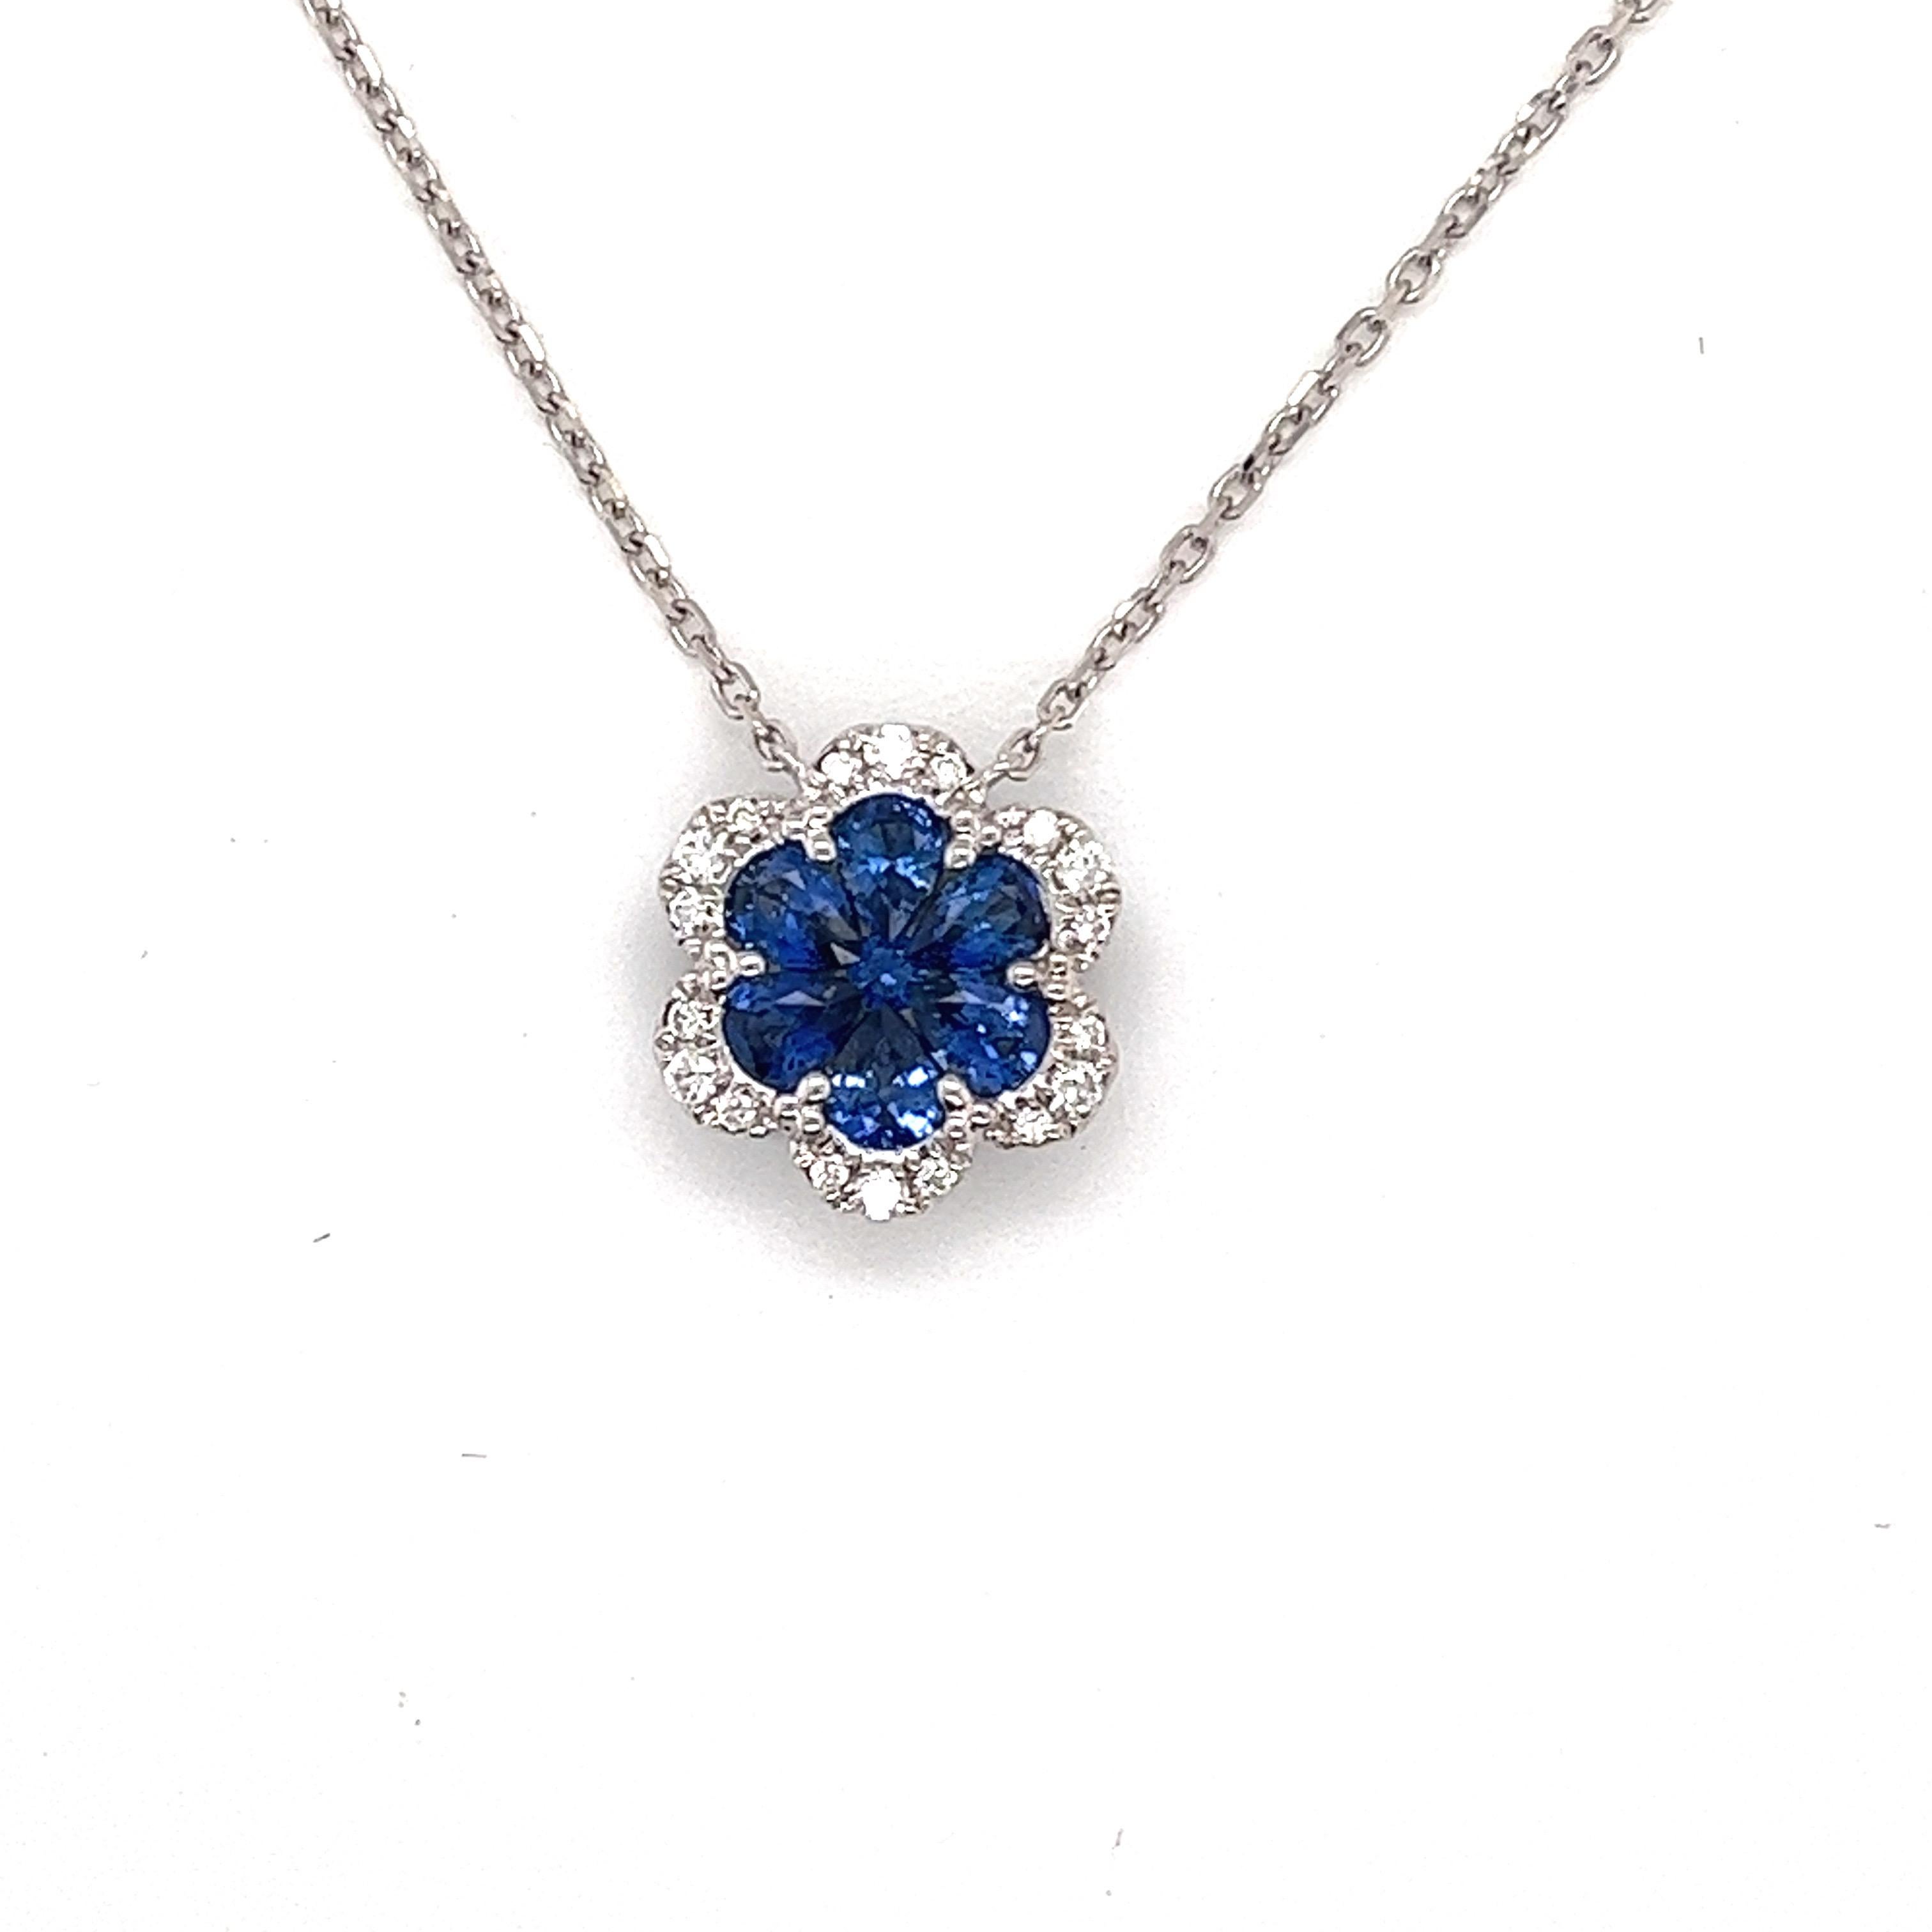 6 pear shape sapphires weighing 1.04 cts
1 round sapphire weighing .04 cts
18 round diamonds weighing .13 cts
H-SI
Set in 18k white gold
Adjustable 16-18 inch white gold chain
3.41 g